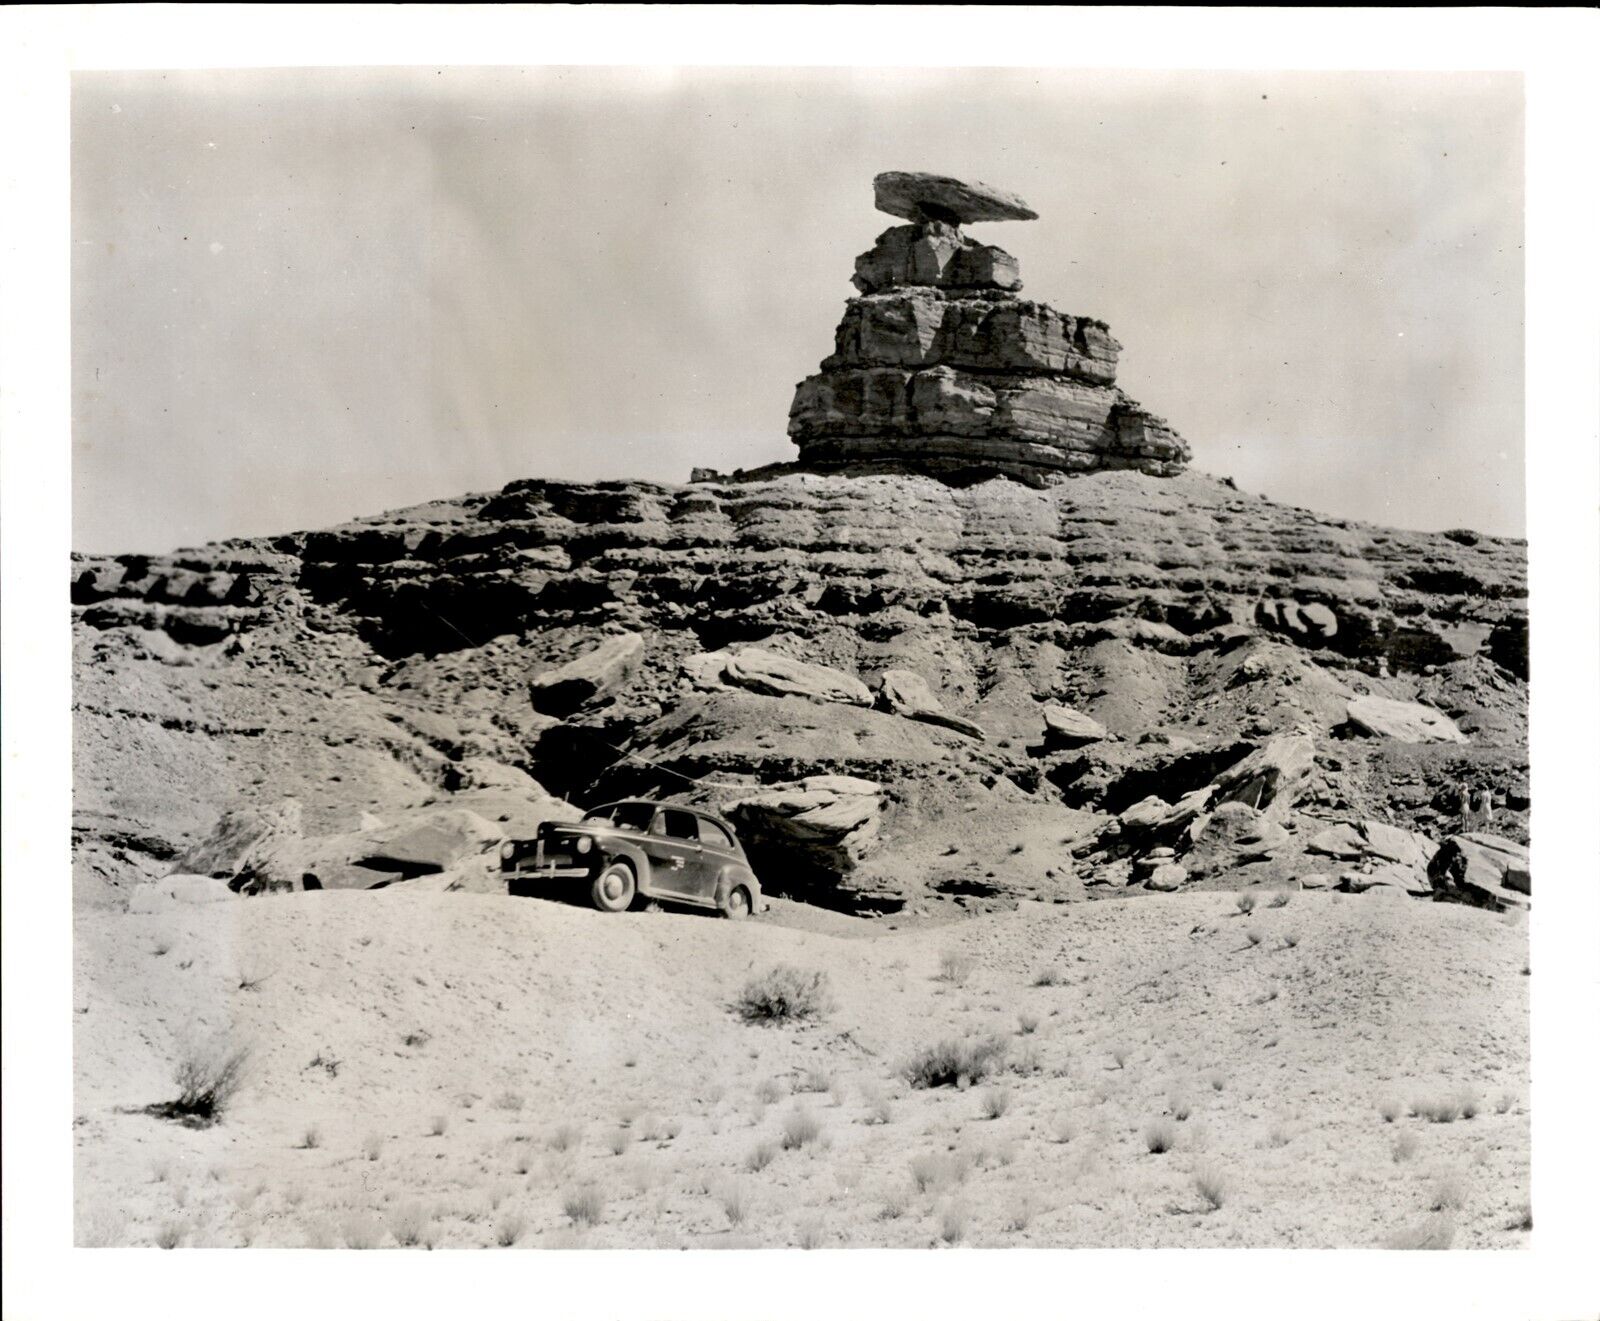 LG29 1948 Original Photo MEXICAN HAT ROCK FORMATION MONUMENT VALLEY UTAH